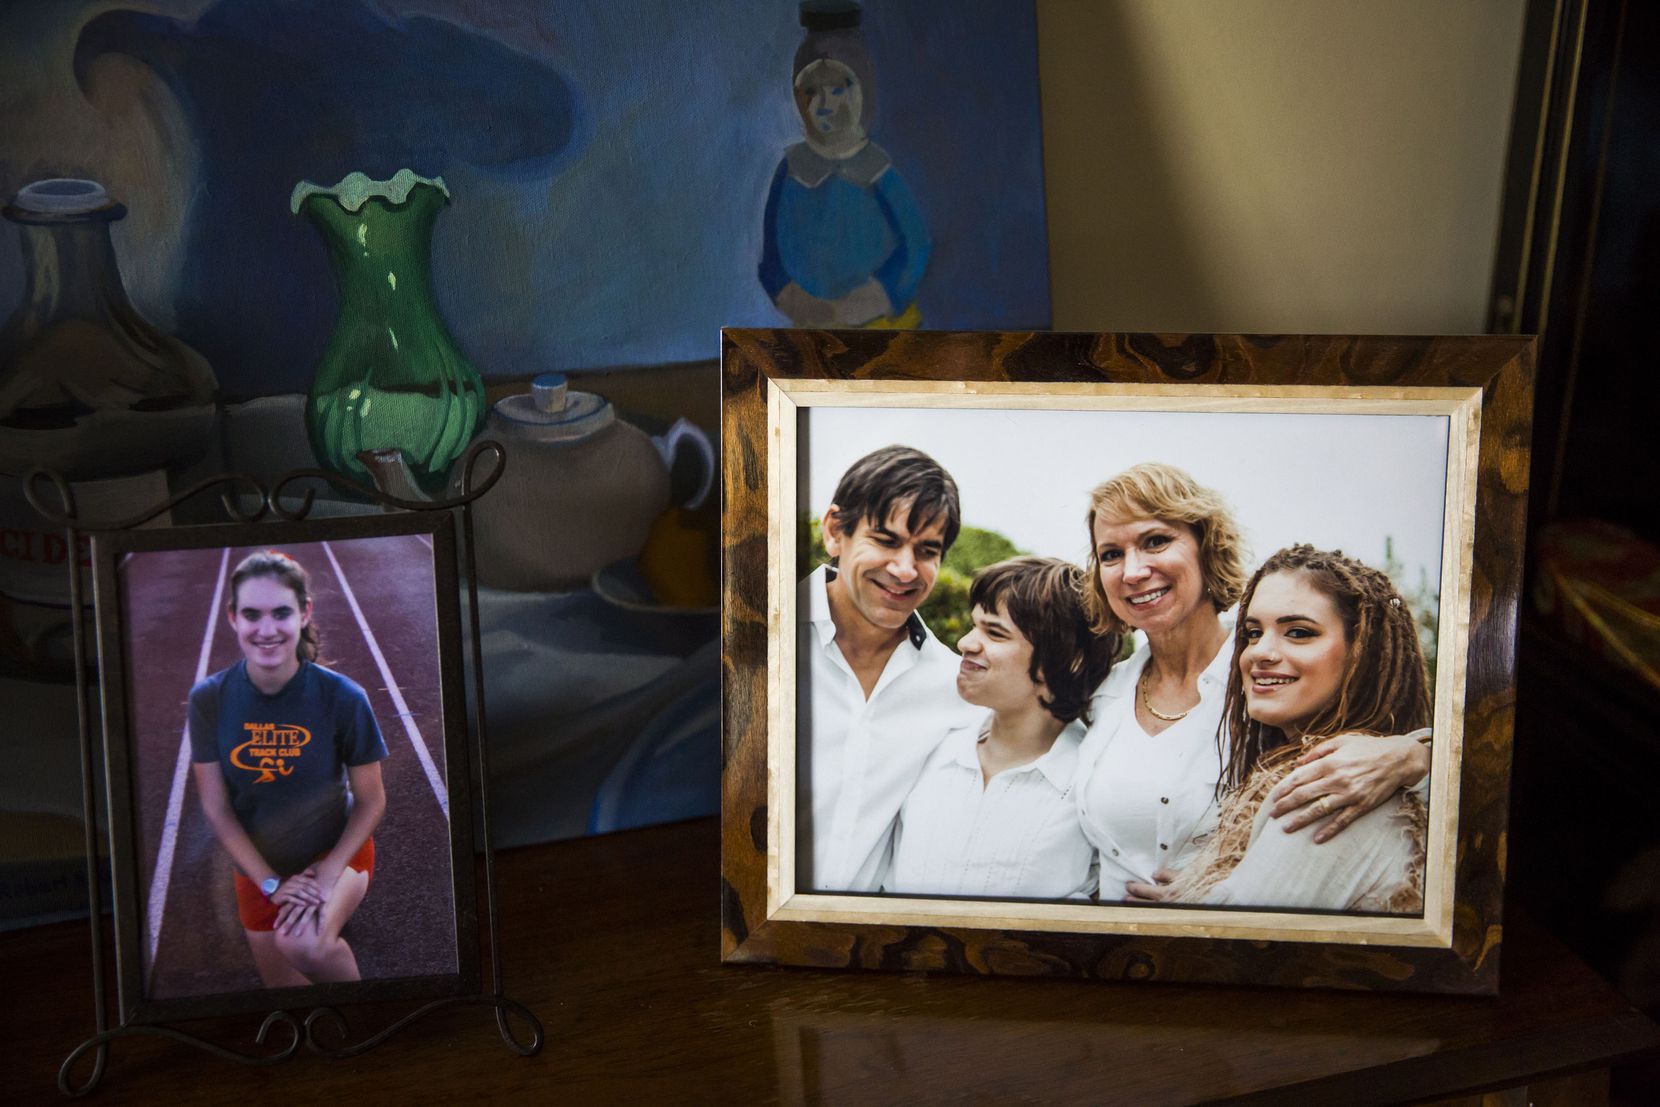 A framed photo in the family's home shows the Zartlers and their twin daughters. (Smiley N....